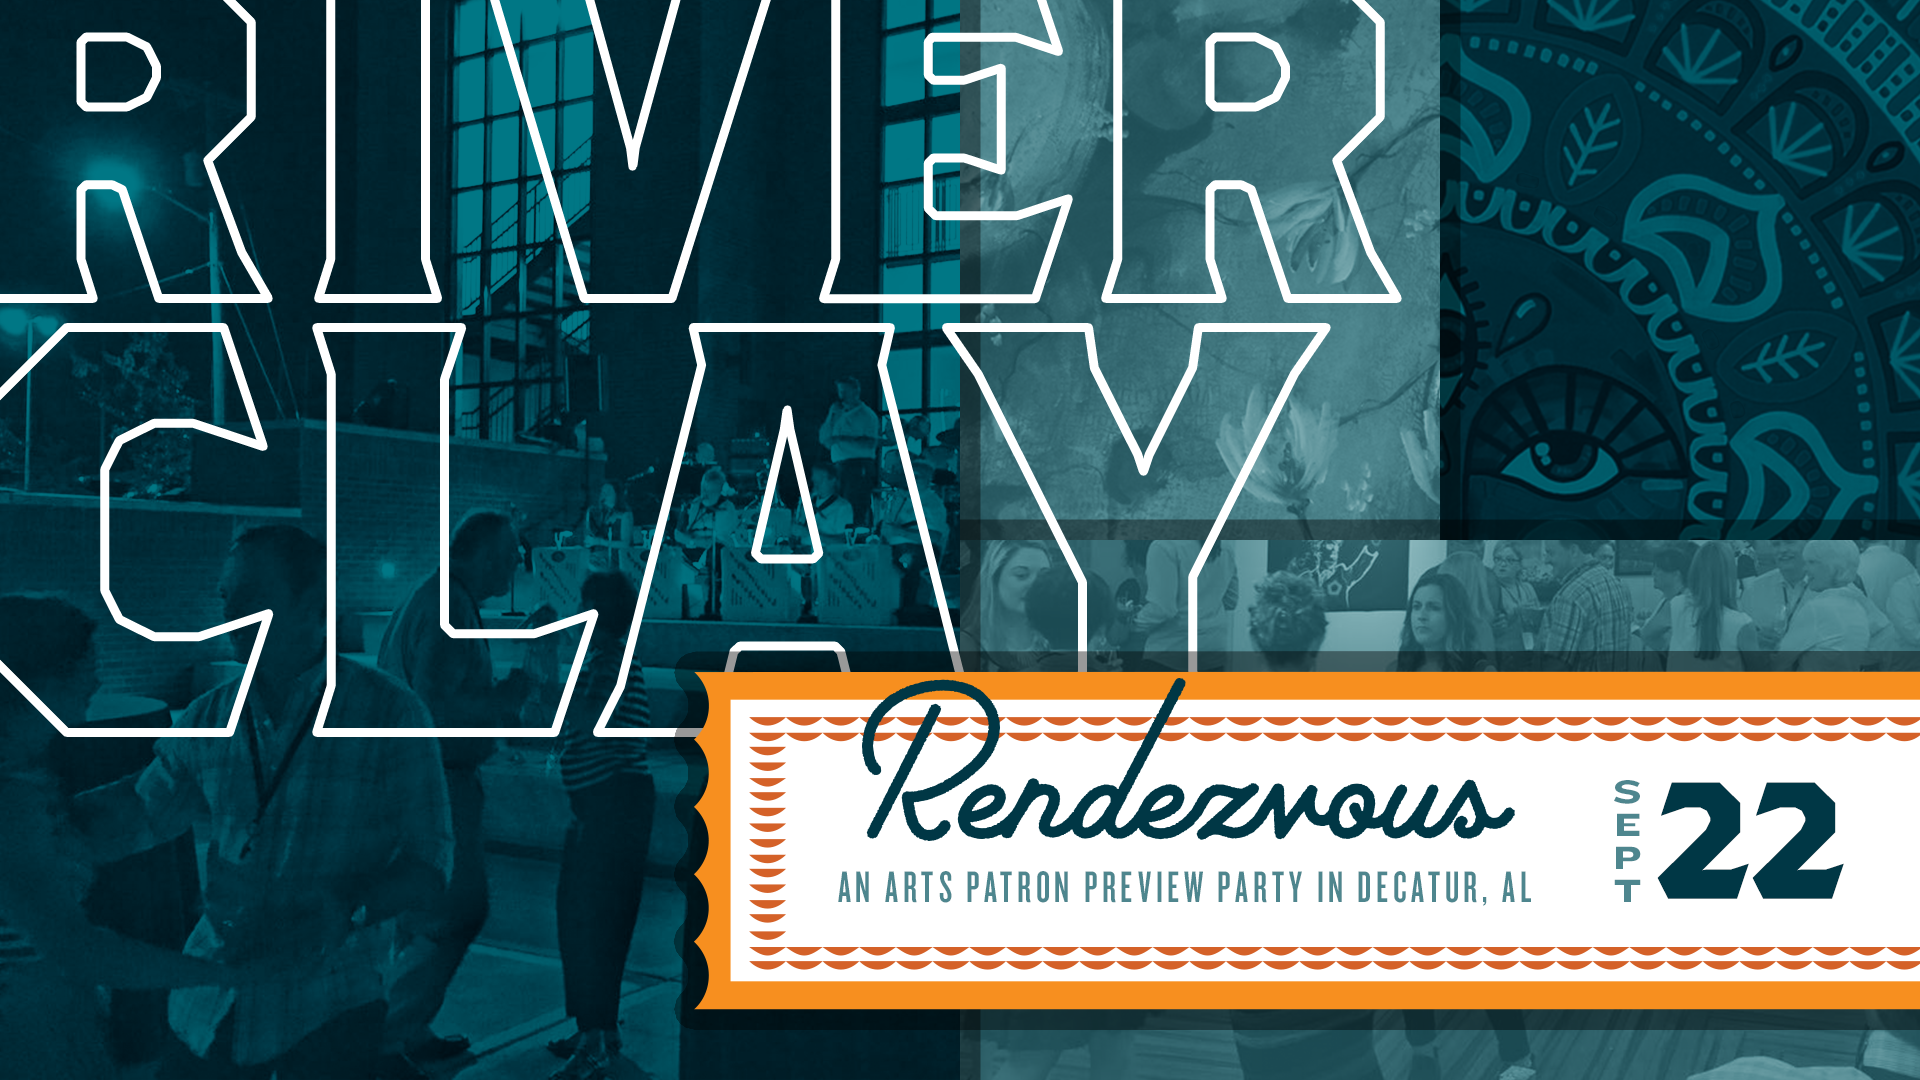 2017 River Clay Rendezvous Tickets on Sale